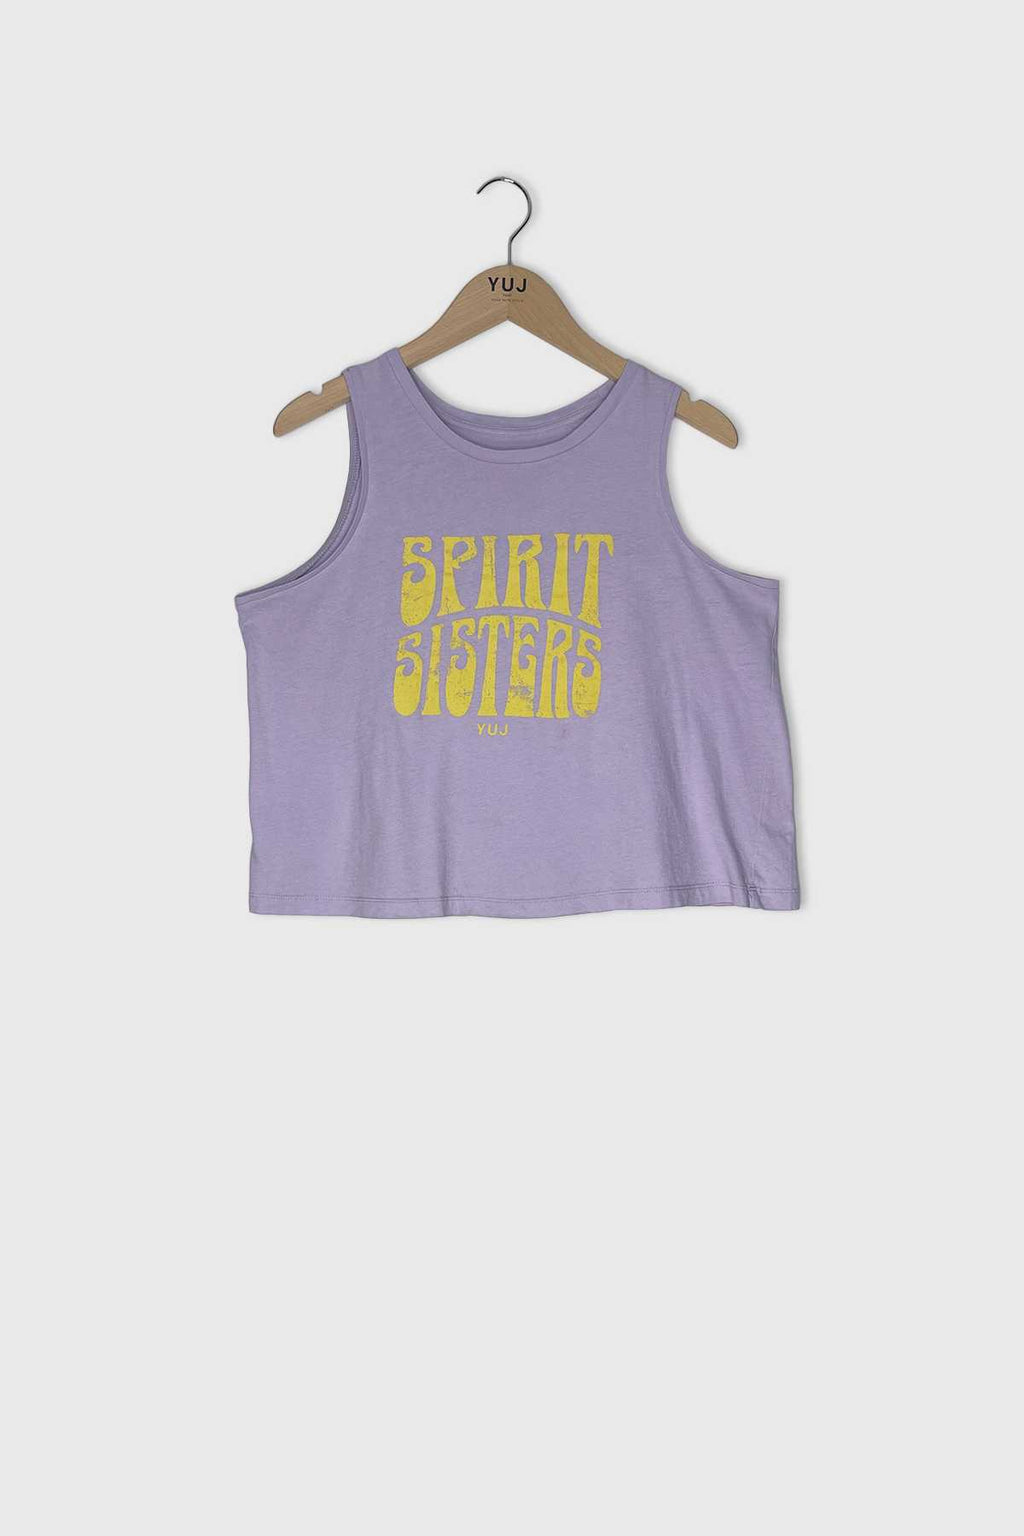 #194 - SPIRIT SISTERS tank top // Size S YUJ - House of Mindfulness